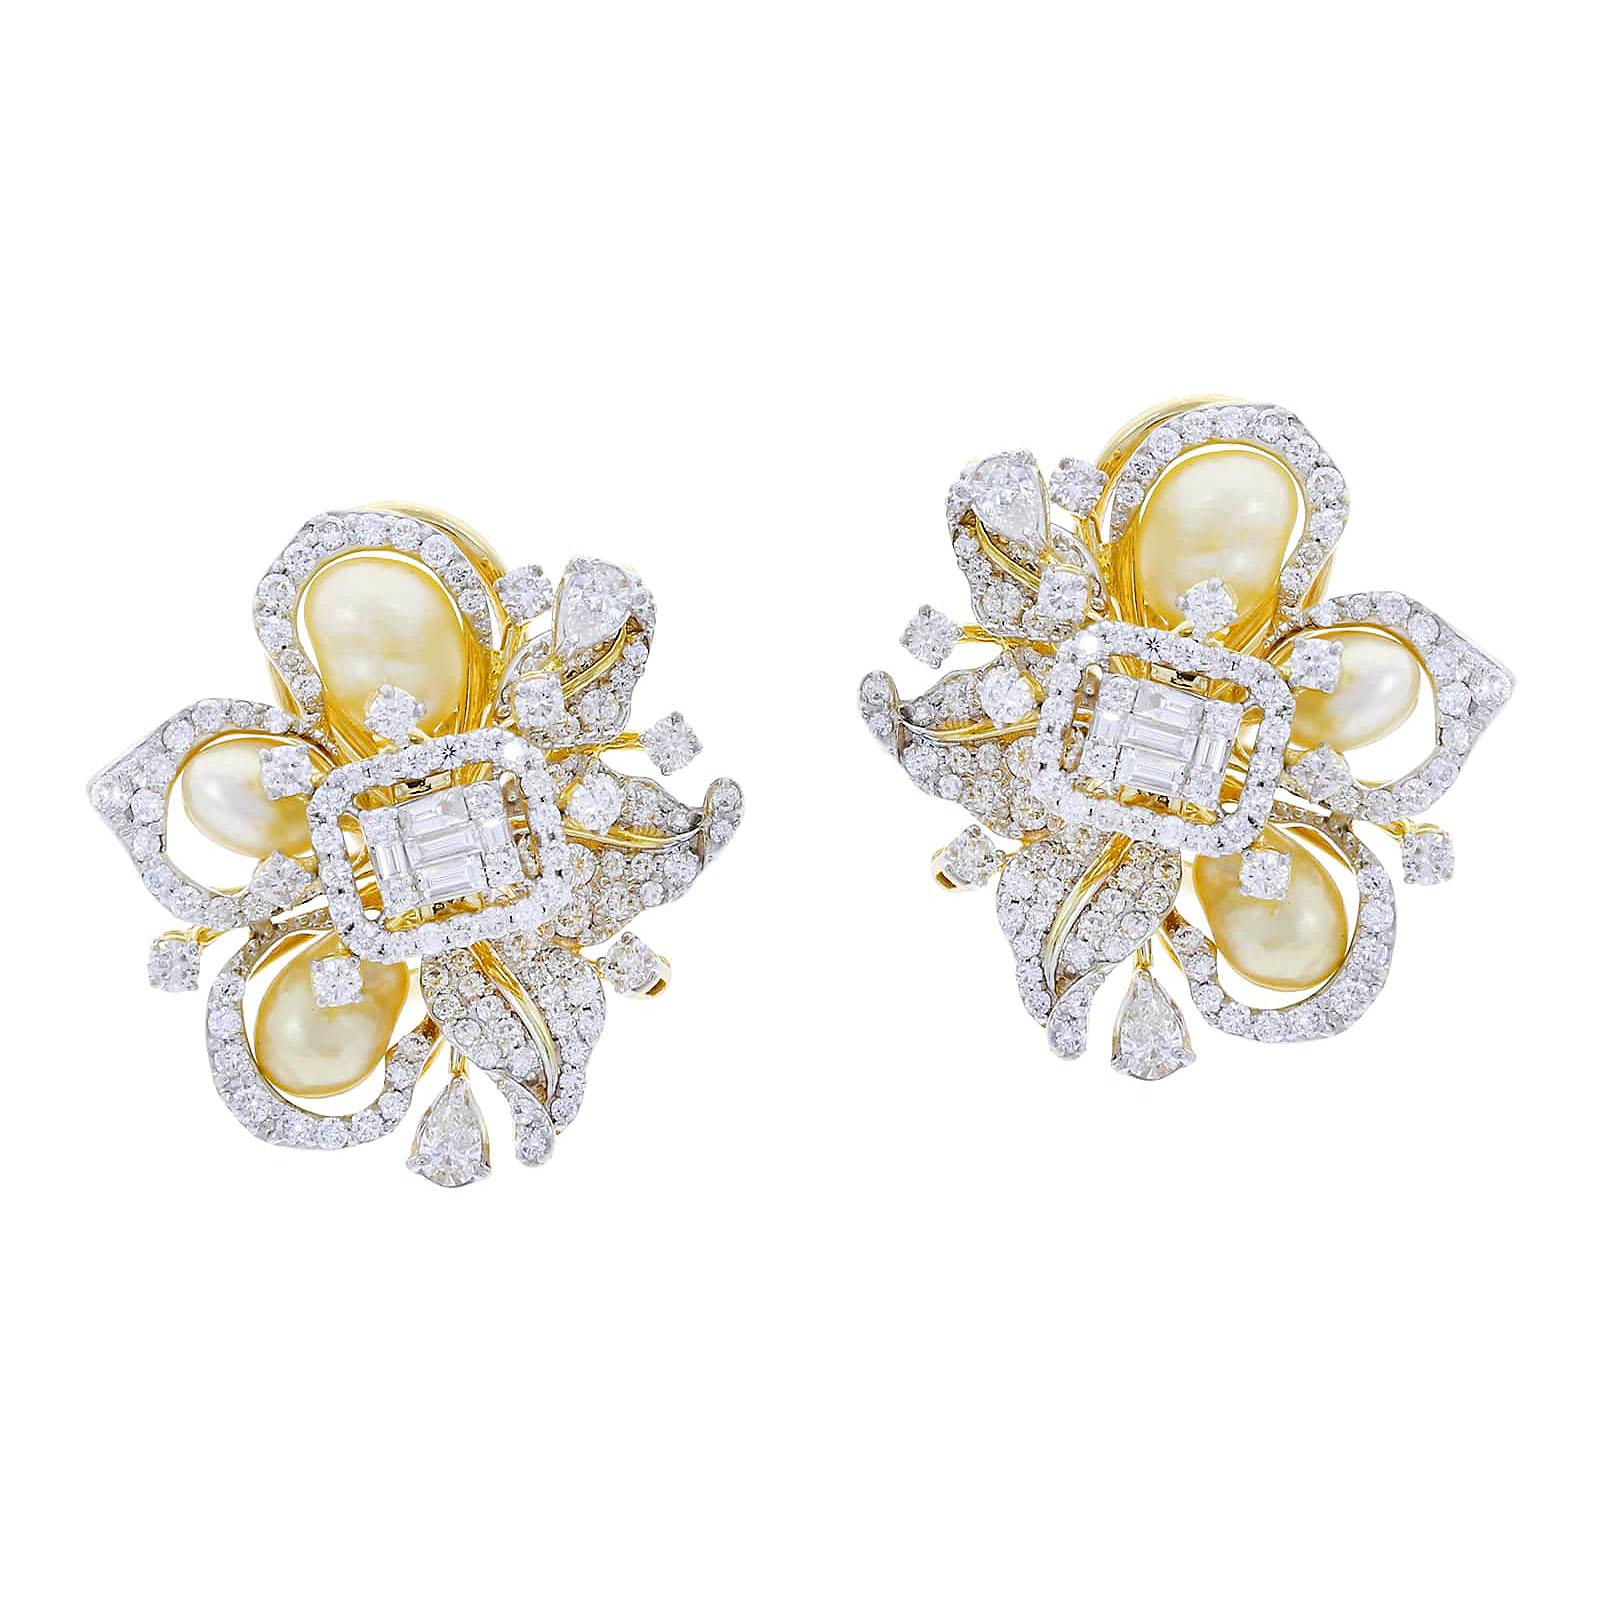 A stylish pair of ribbon-style earrings set with combinations of two most elegant jewels: pearls and diamonds. The pearls weigh appx. 9.7 cts. and the diamonds (mix of rounds, tapered, and pears) are 3.34 cts. Estimated Clarity: VS, Color: H. Set in